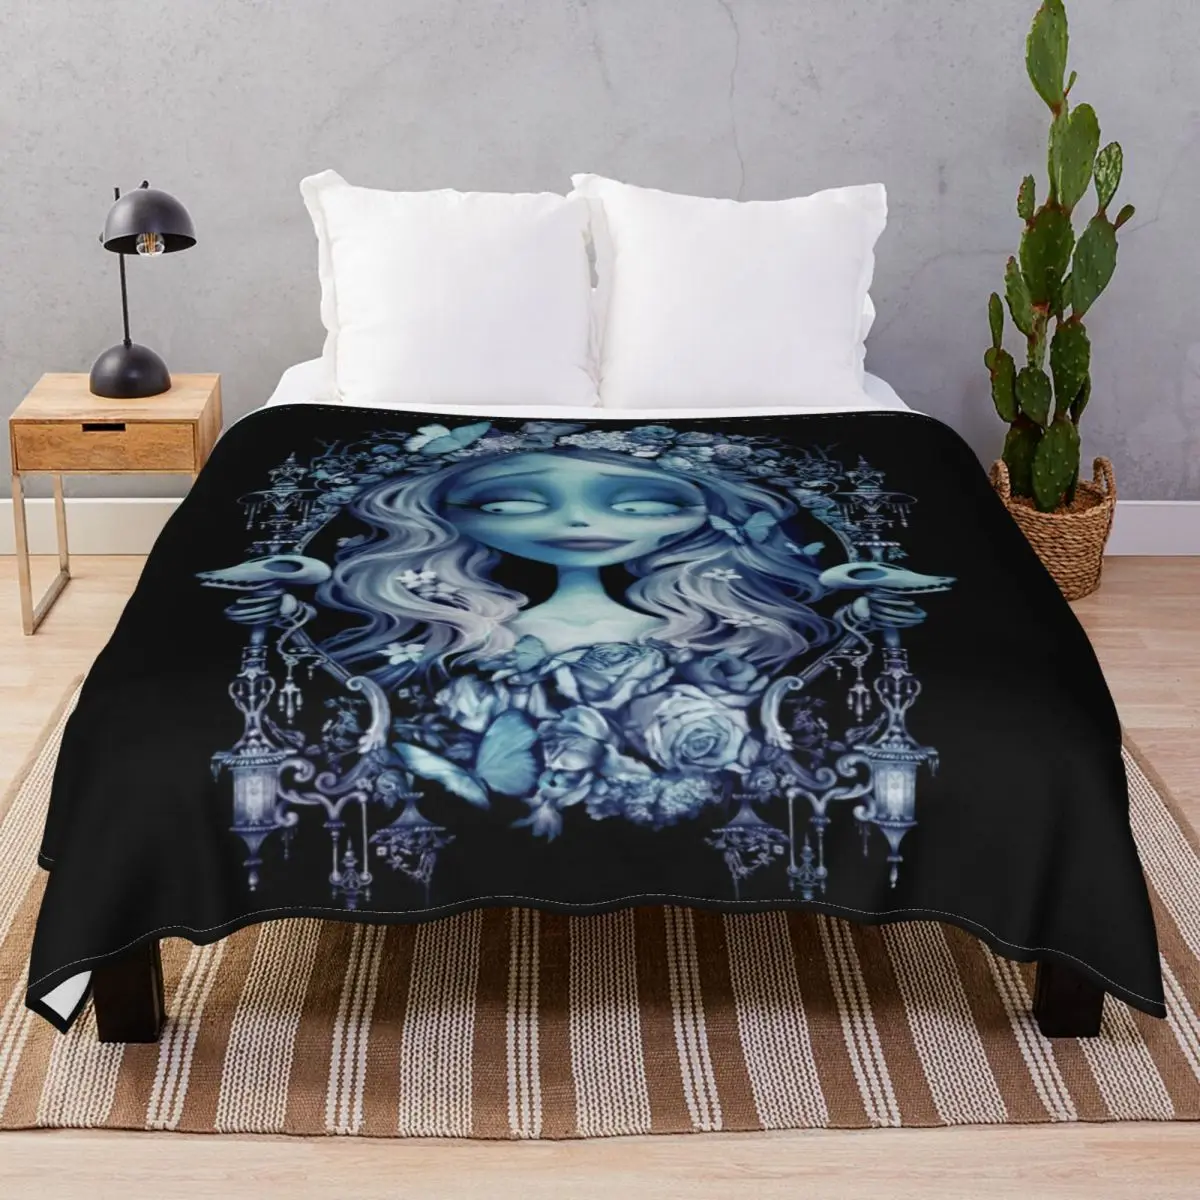 Wedding In The Night Blankets Flannel Winter Multifunction Throw Blanket for Bed Sofa Travel Cinema